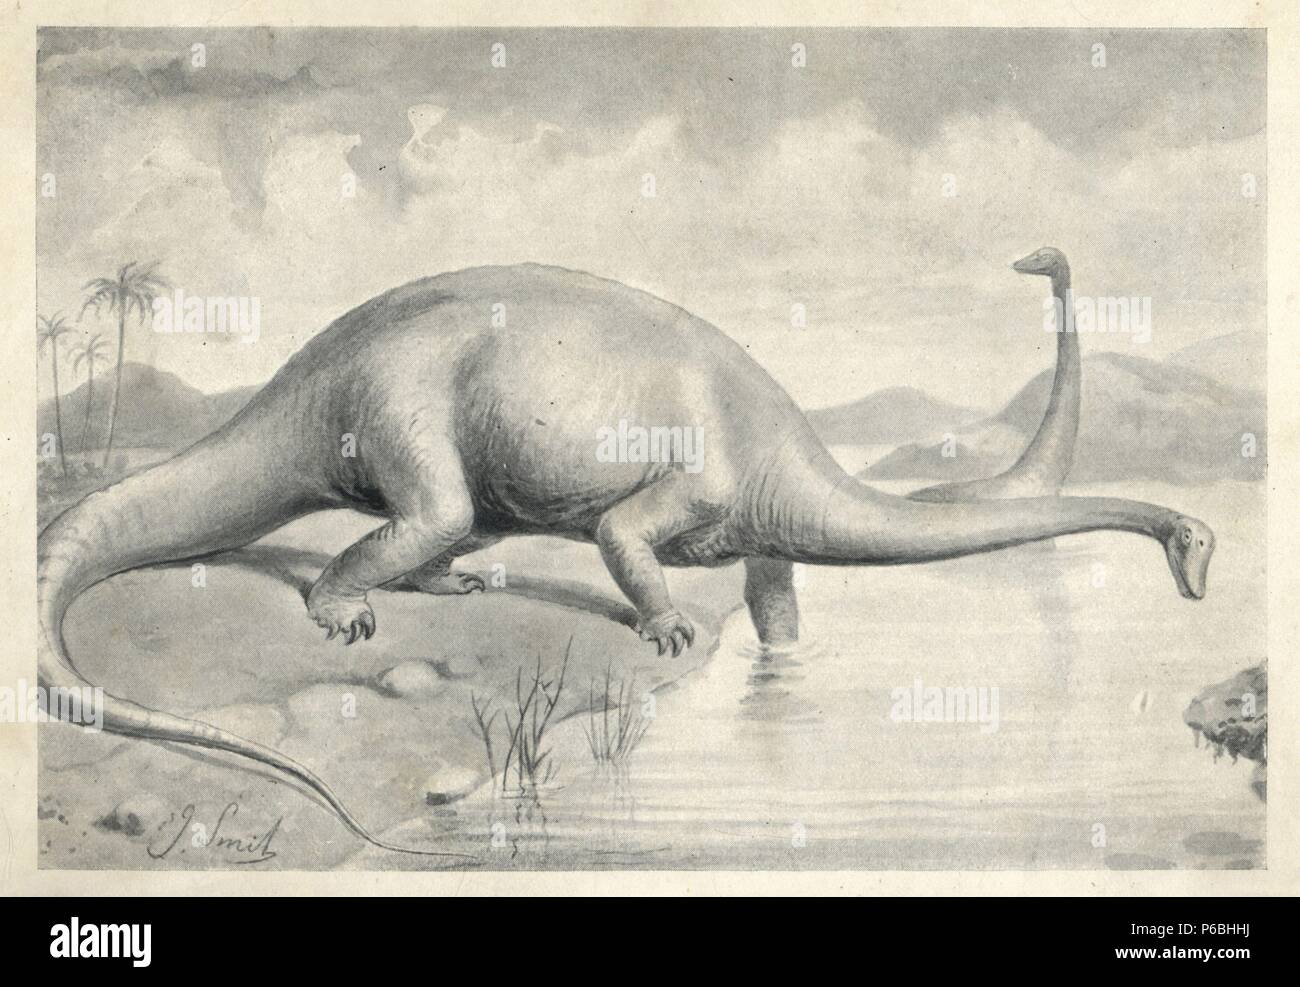 Diplodocus carnegii, the greatest known dinosaur. Illustration by J. Smit from H. N. Hutchinson's 'Extinct Monsters and Creatures of Other Days,' Chapman and Hall, London, 1894. Stock Photo